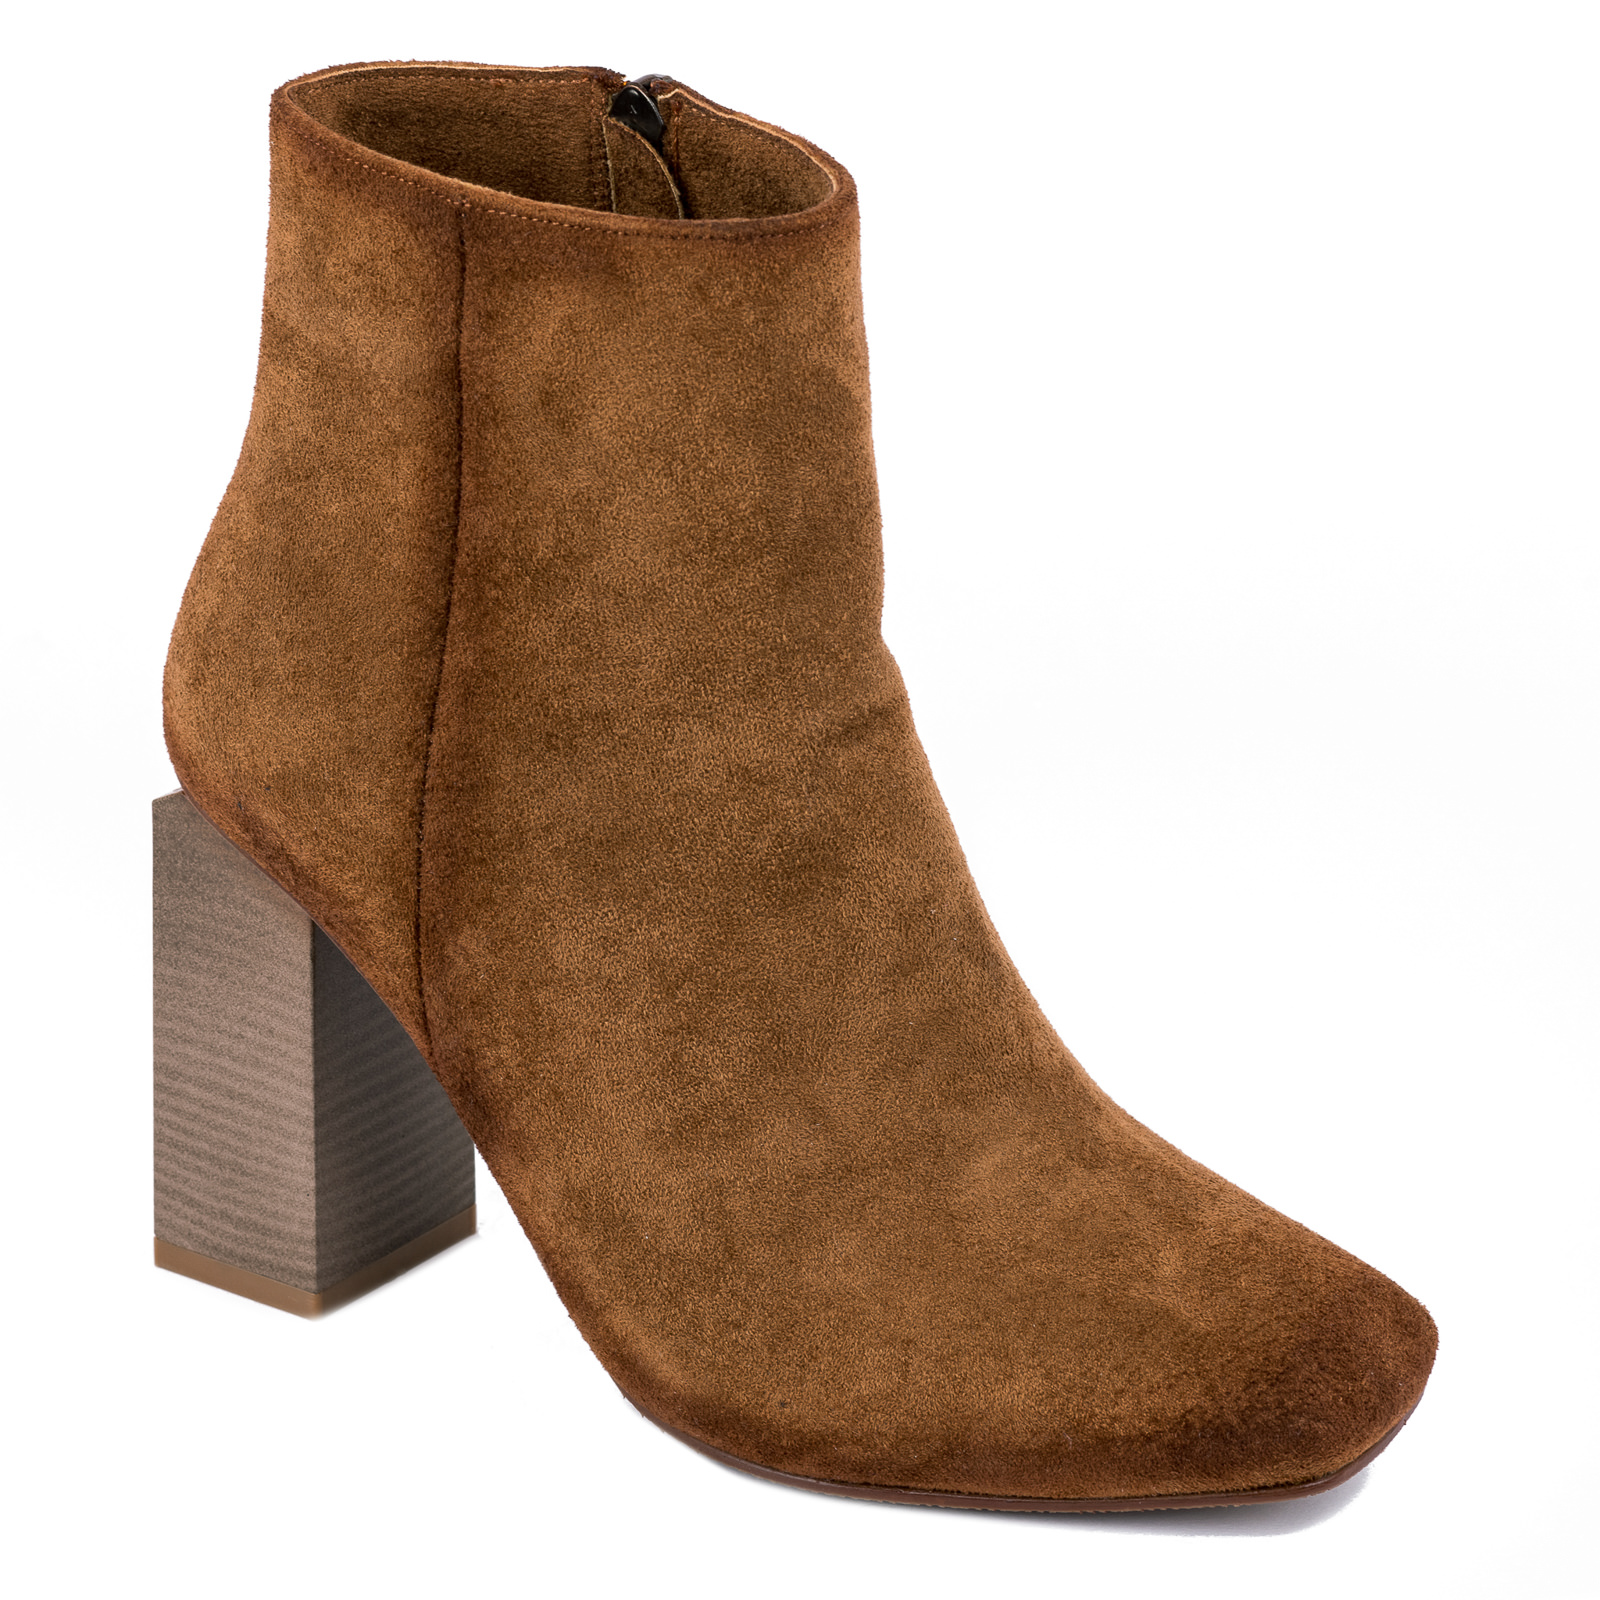 VELOUR ANKLE BOOTS WITH ZIPPER AND BLOCK HEEL - CAMEL